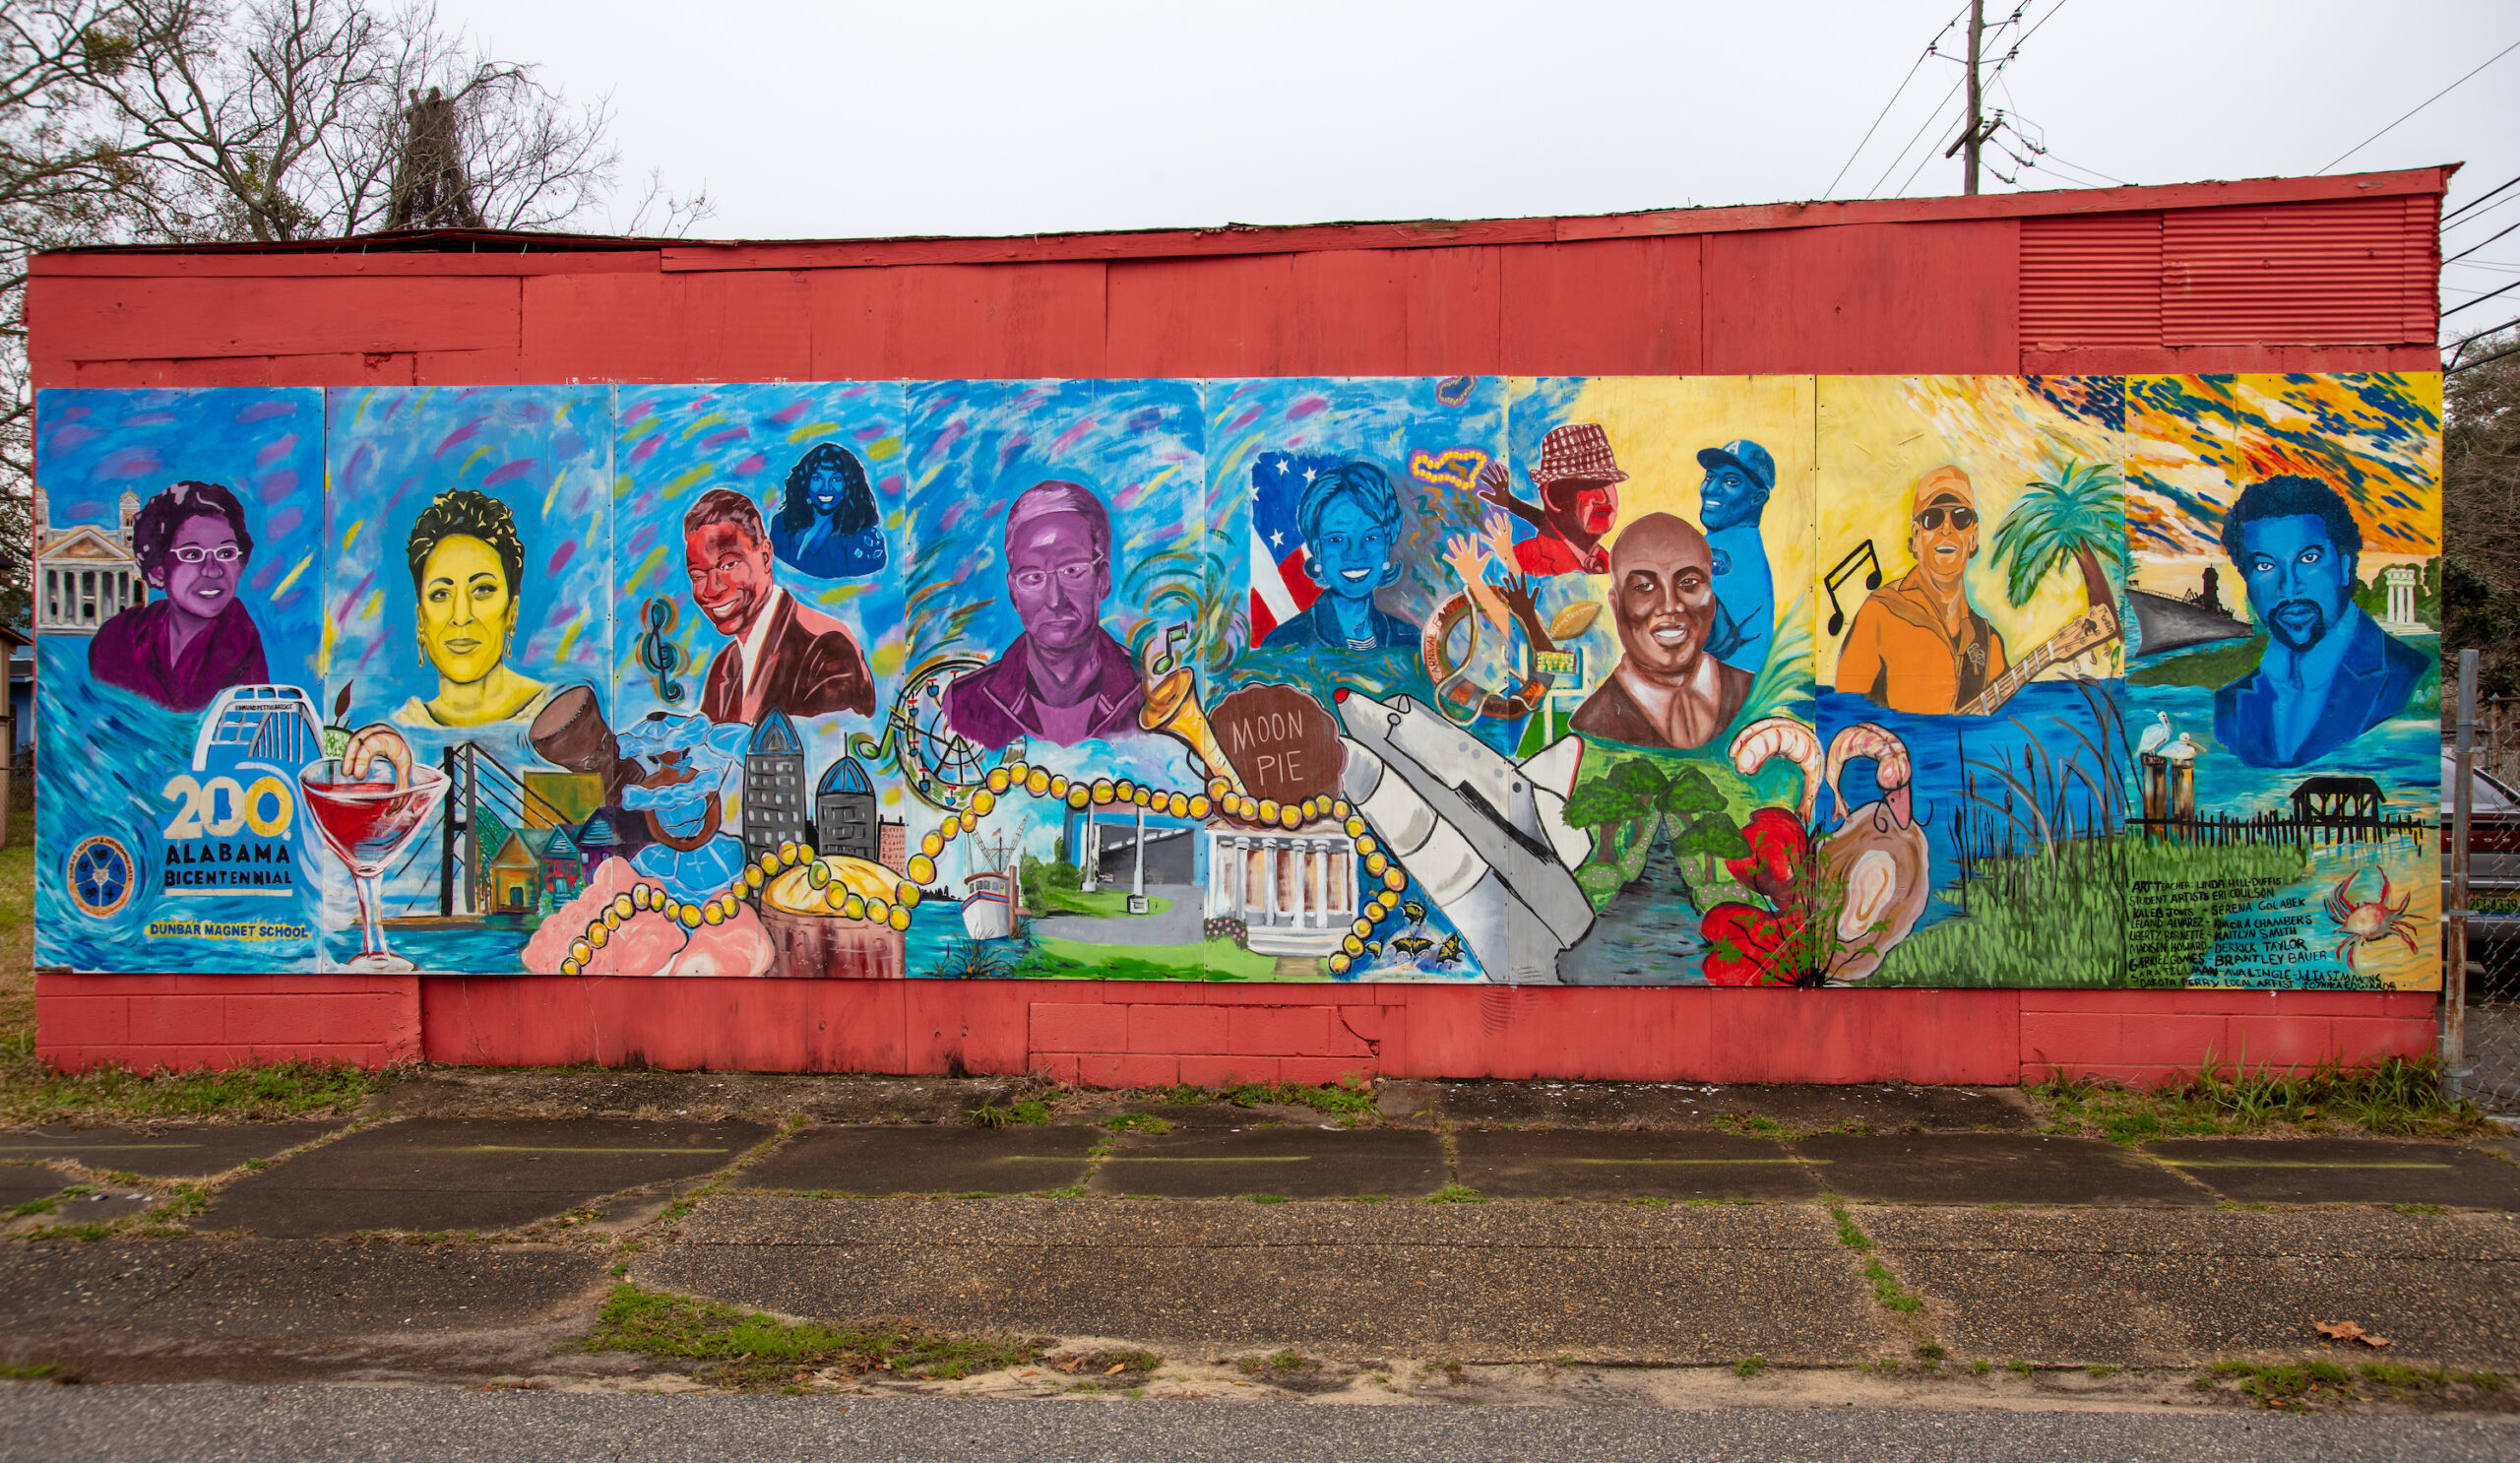 A very colorful mural of several notable Alabama faces.